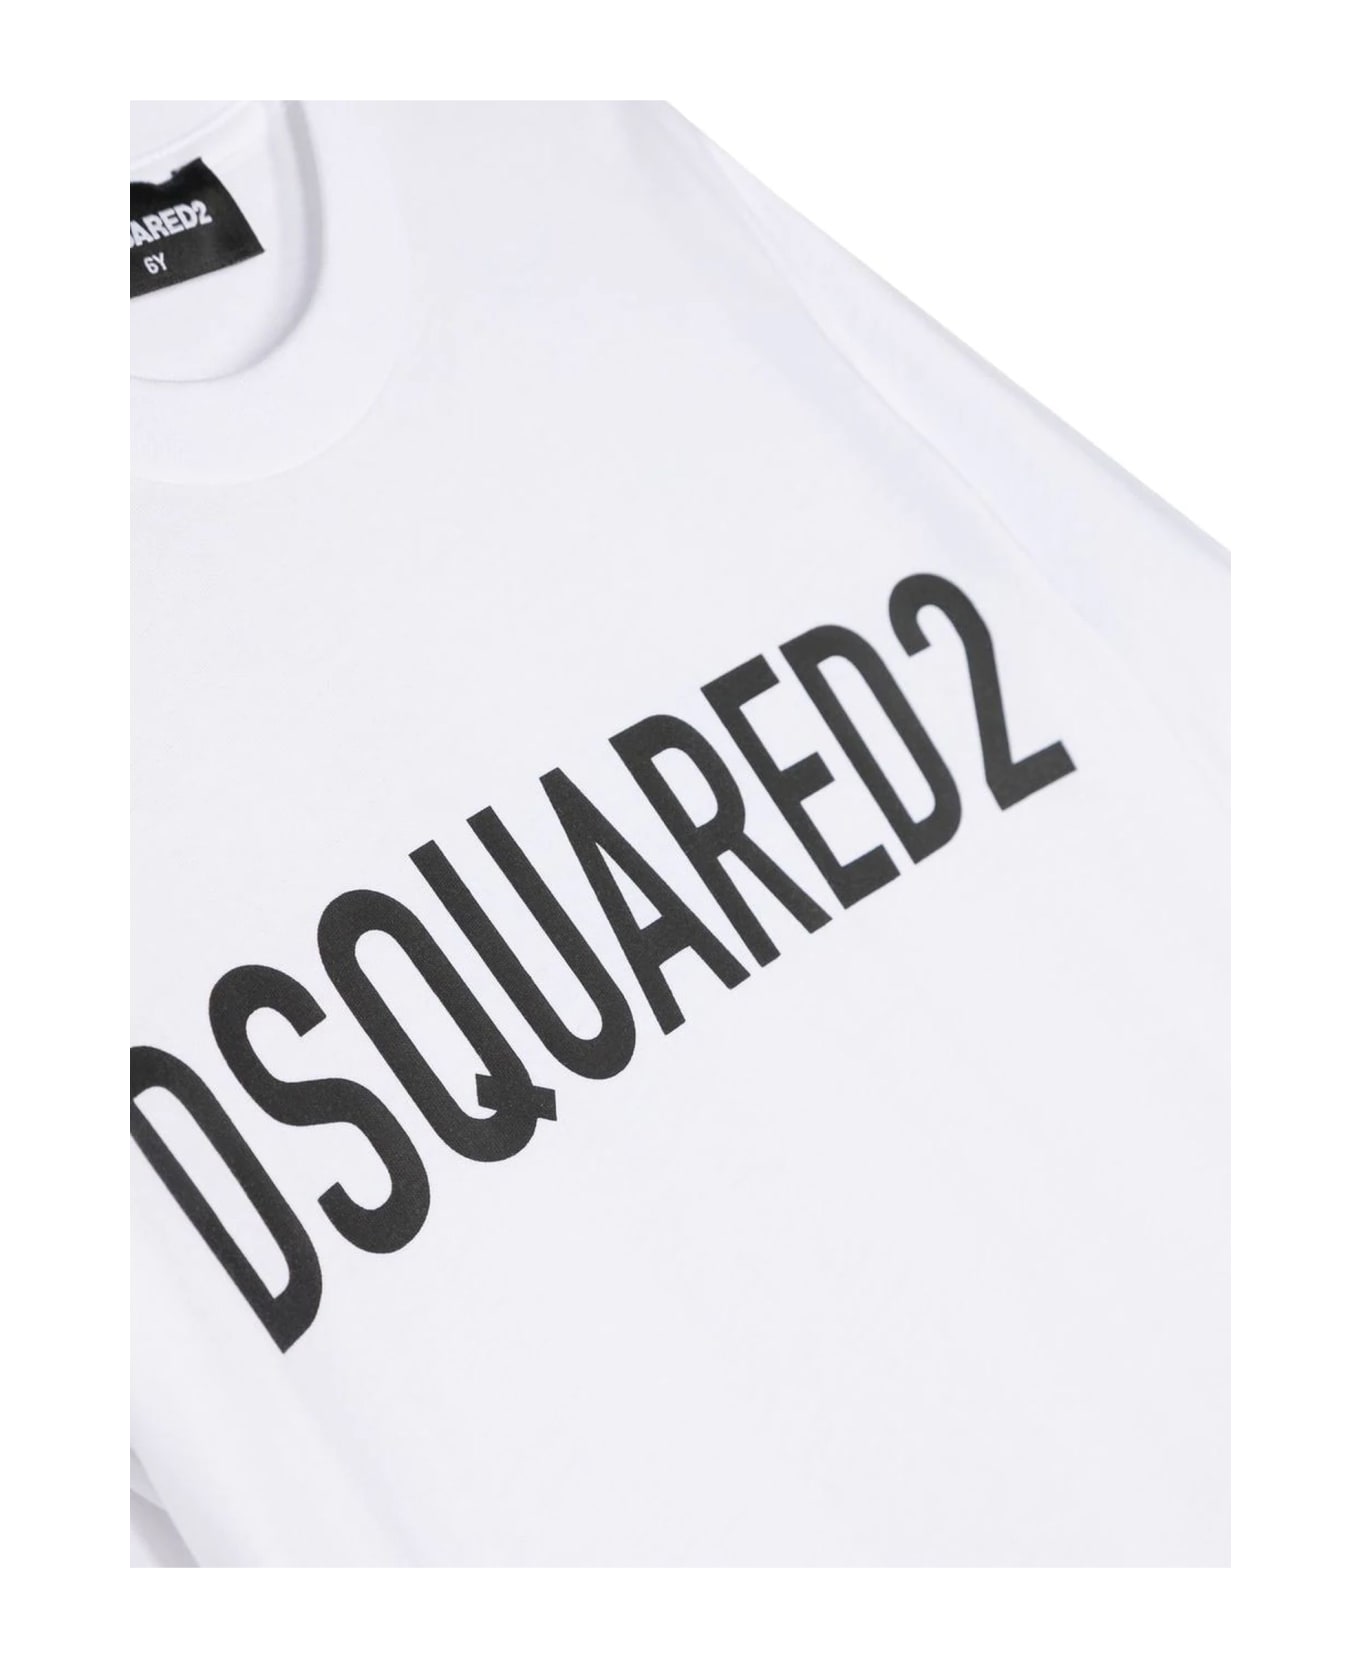 Dsquared2 T-shirts And Polos White - White